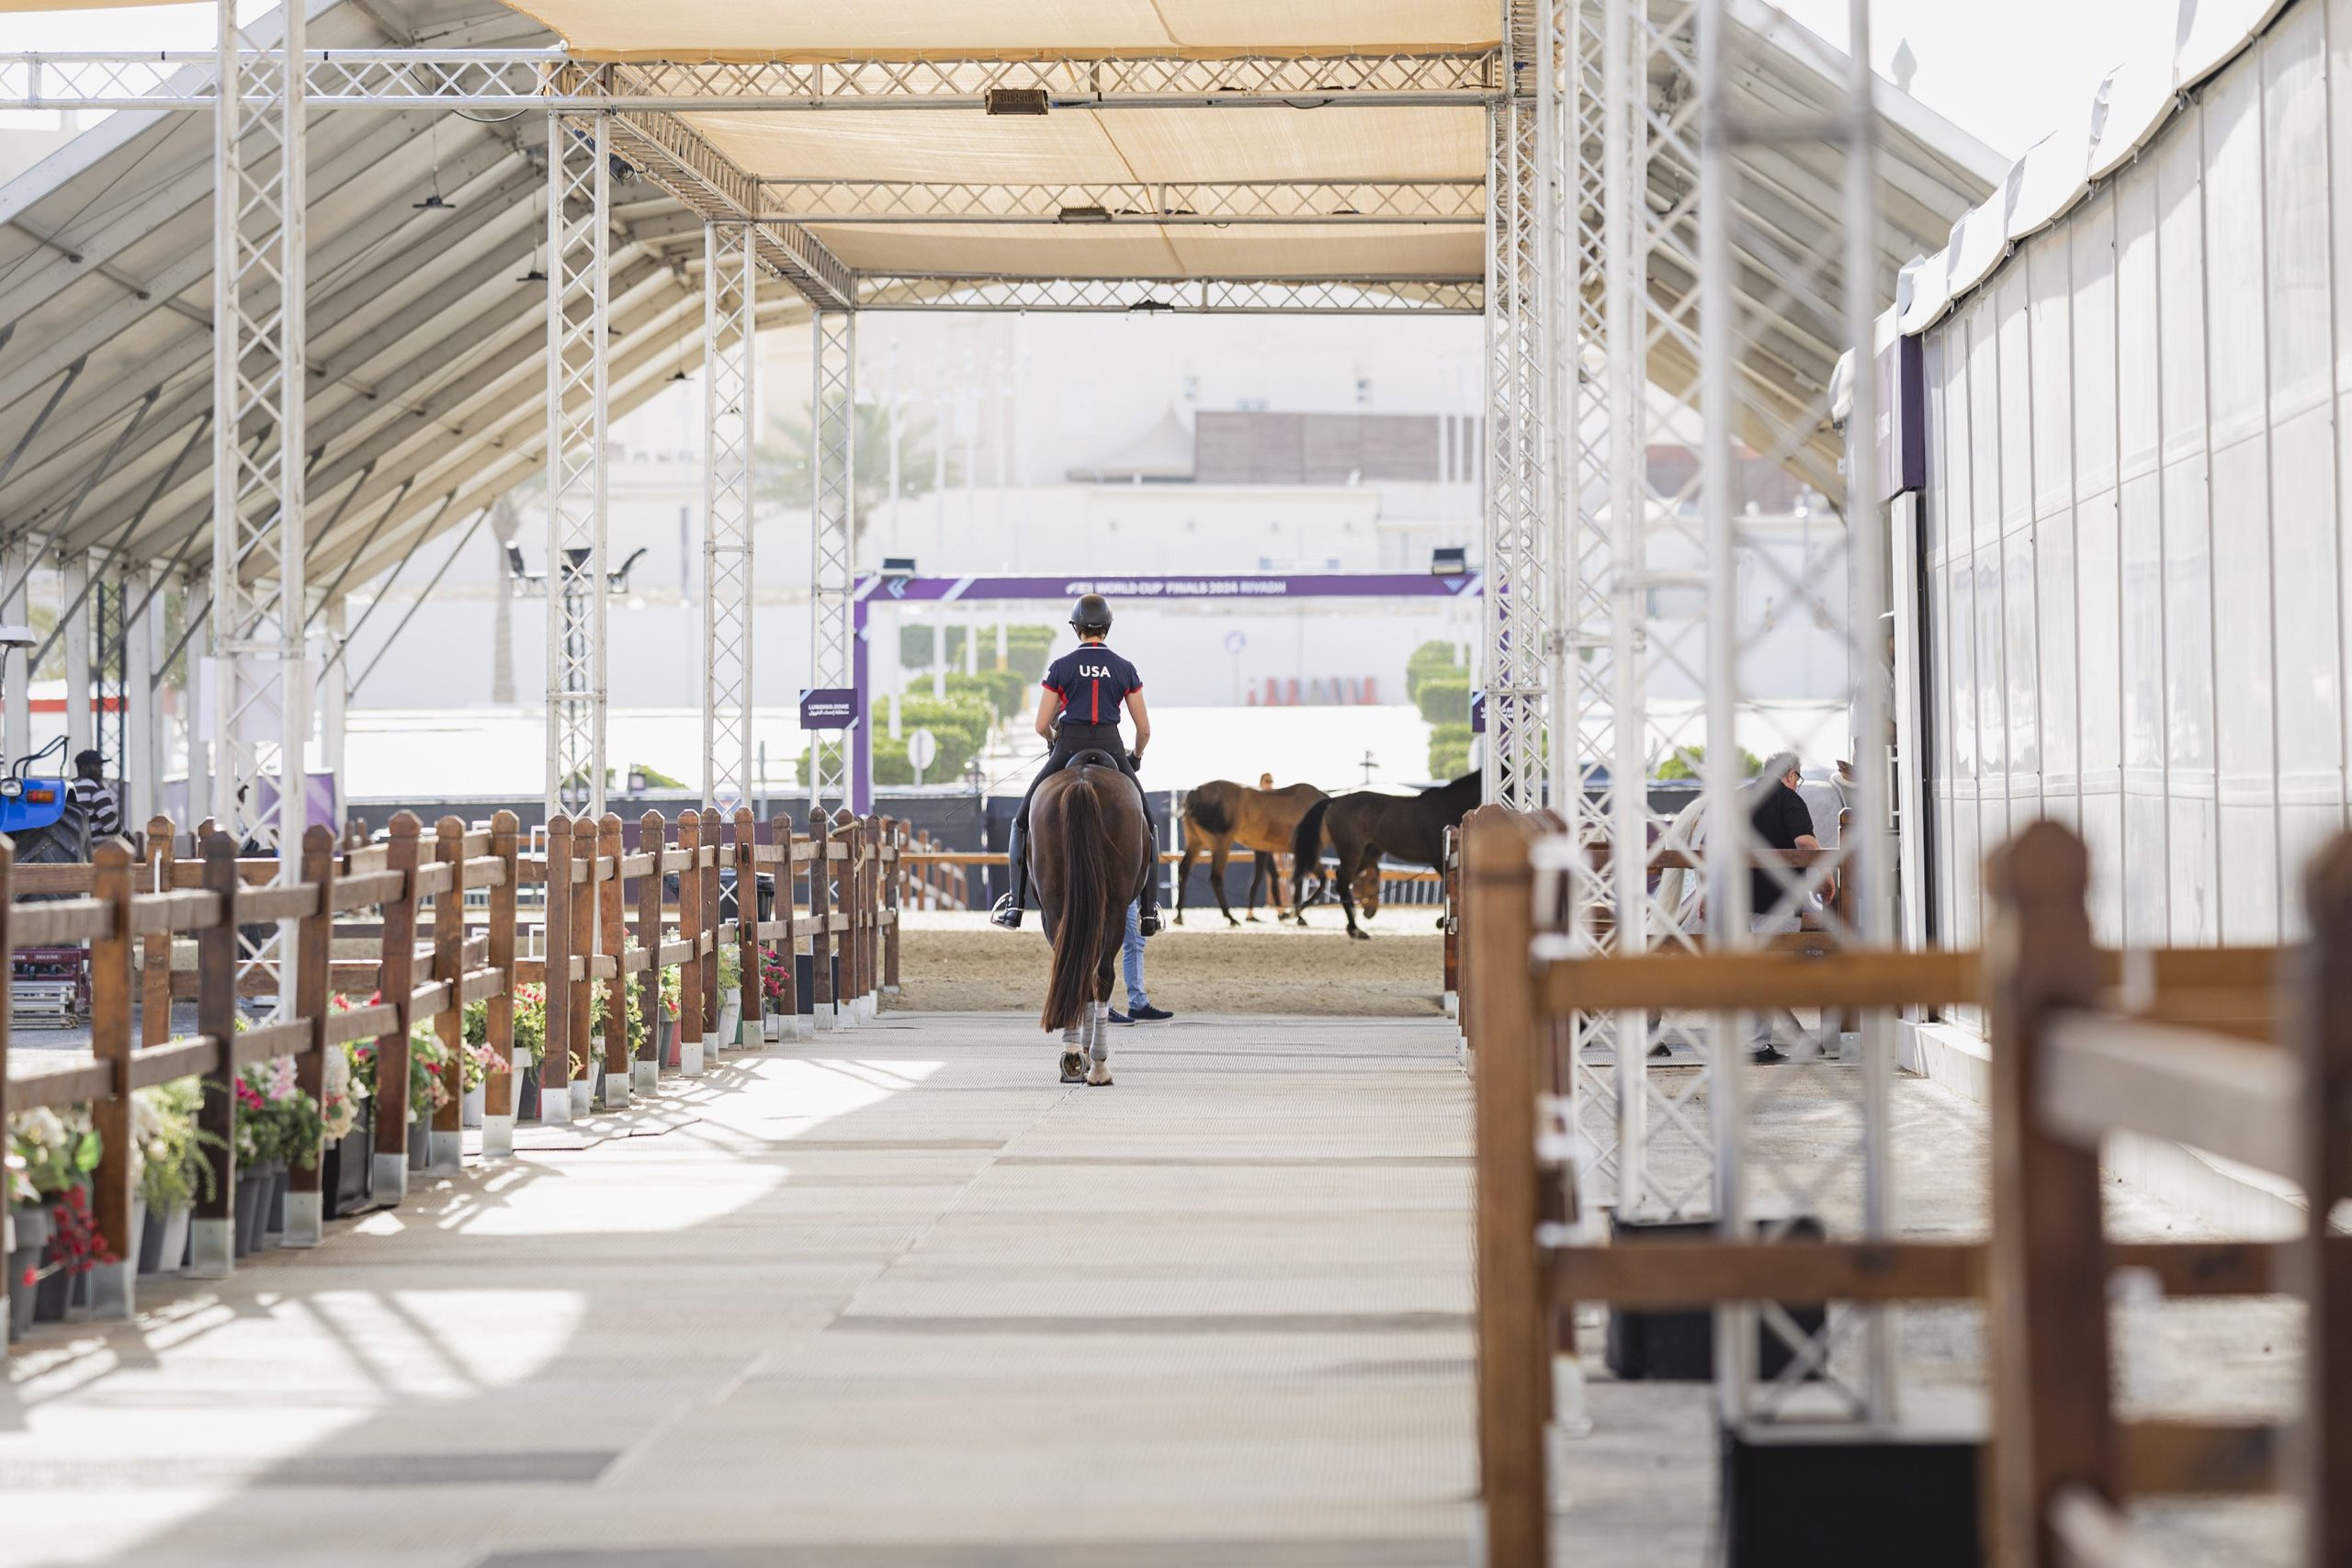 Finale des FEI Dressage and Jumping World Cup™ – diese Woche in Riad Foto: Johanna Milse